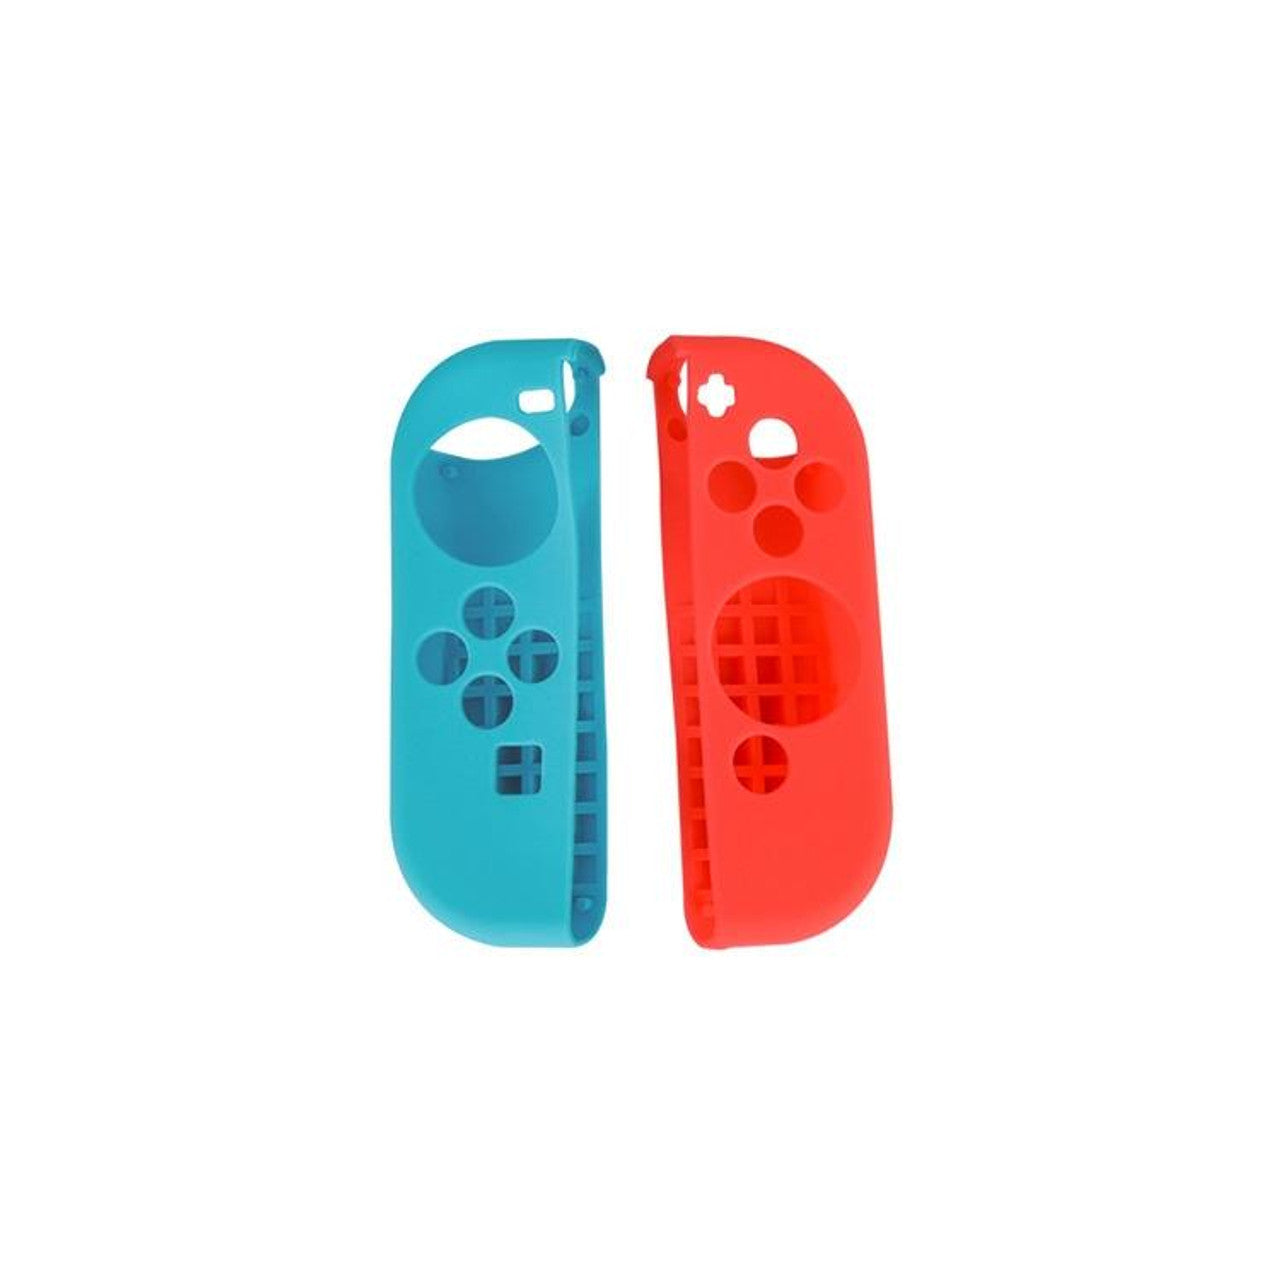 KJH 7 in 1 Switch Oled Protection Kit